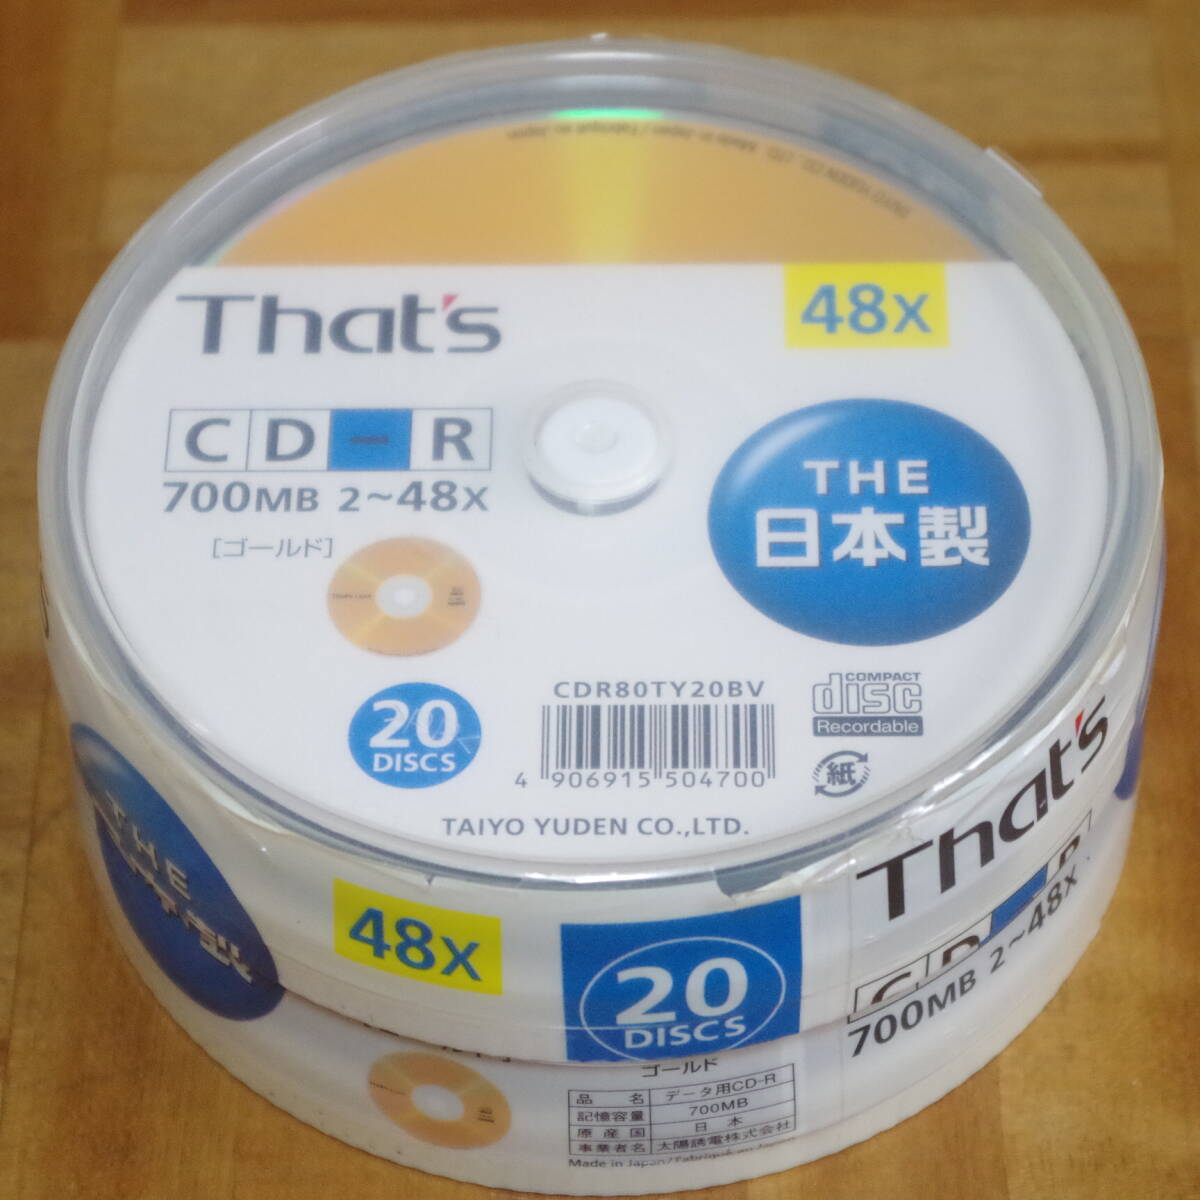  ultra rare! new goods! sun . electro-!That\'s Thats CD-R gold lable spindle case 20 sheets insertion safe made in Japan /CDR80TY20BV/ production end / postage nationwide equal 410 jpy 